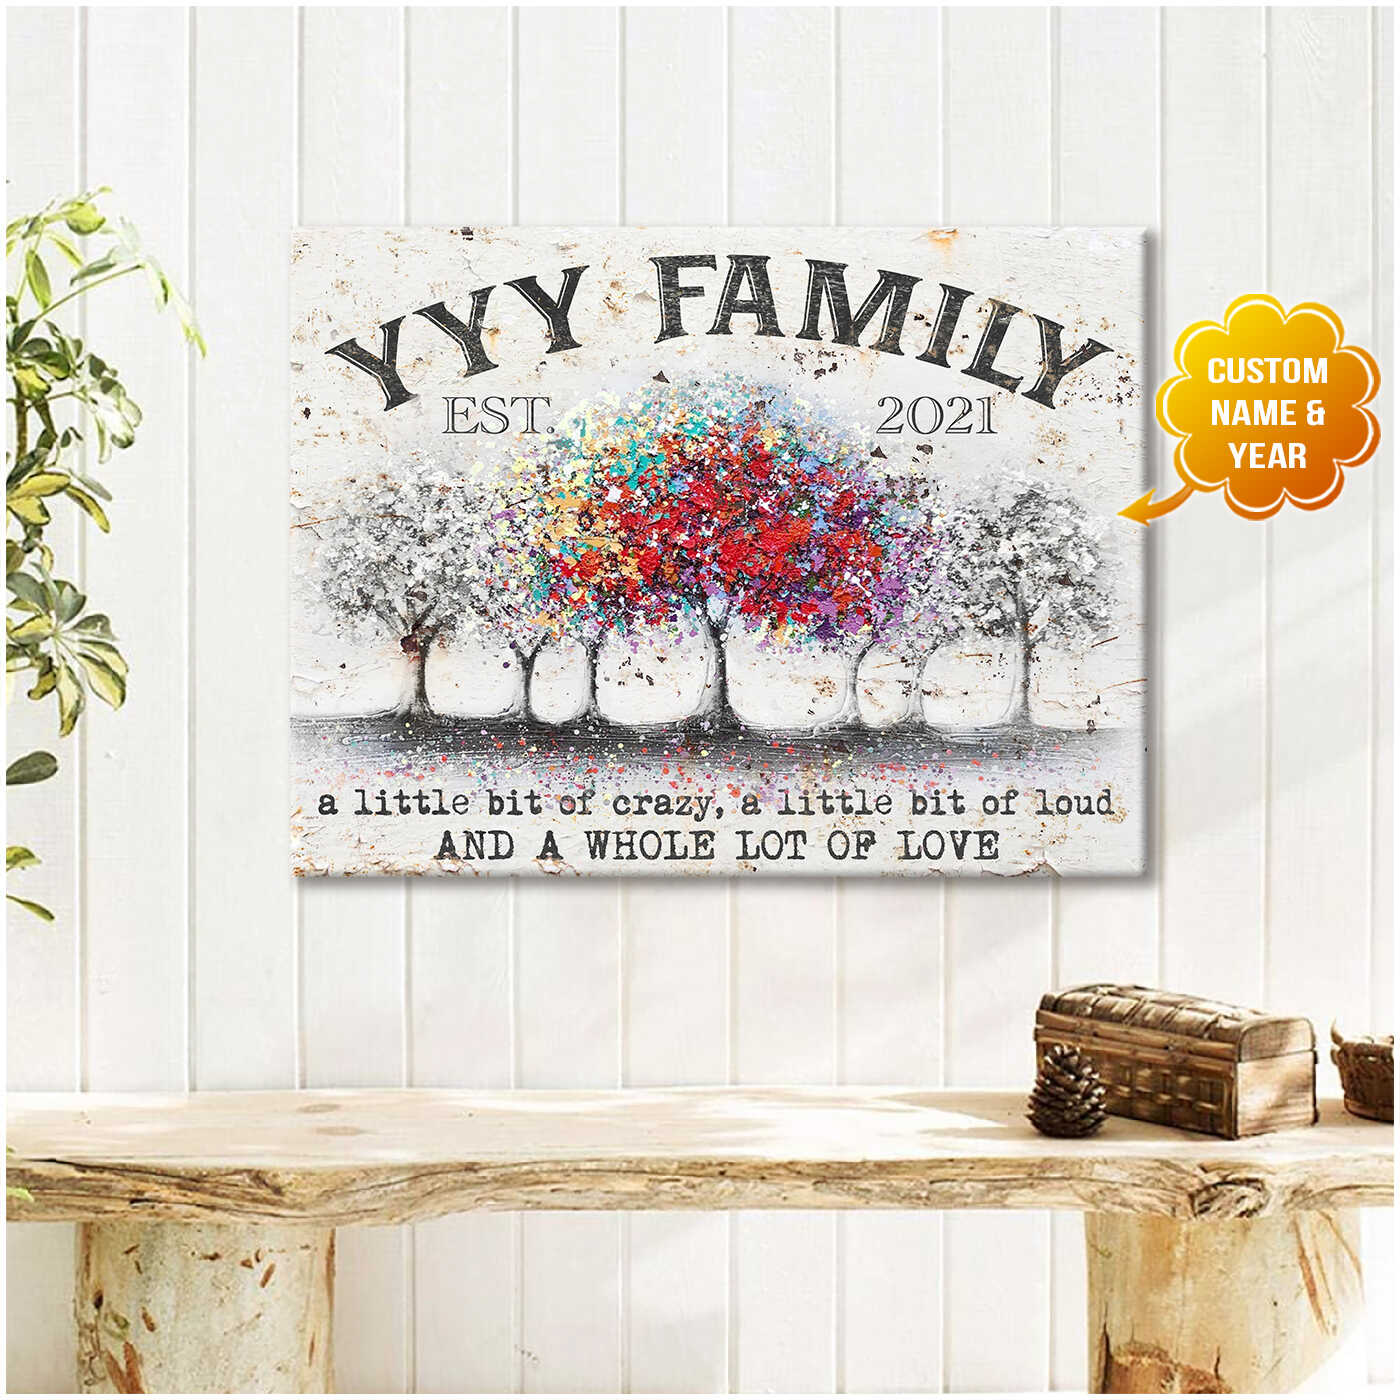 Family A Little Bit Of Crazy A Little Bit Of Loud And A Whole Lot Of Love Beautiful Tree Forest Farmhouse Custom Name And Year Canvas Prints Wall Art Decor